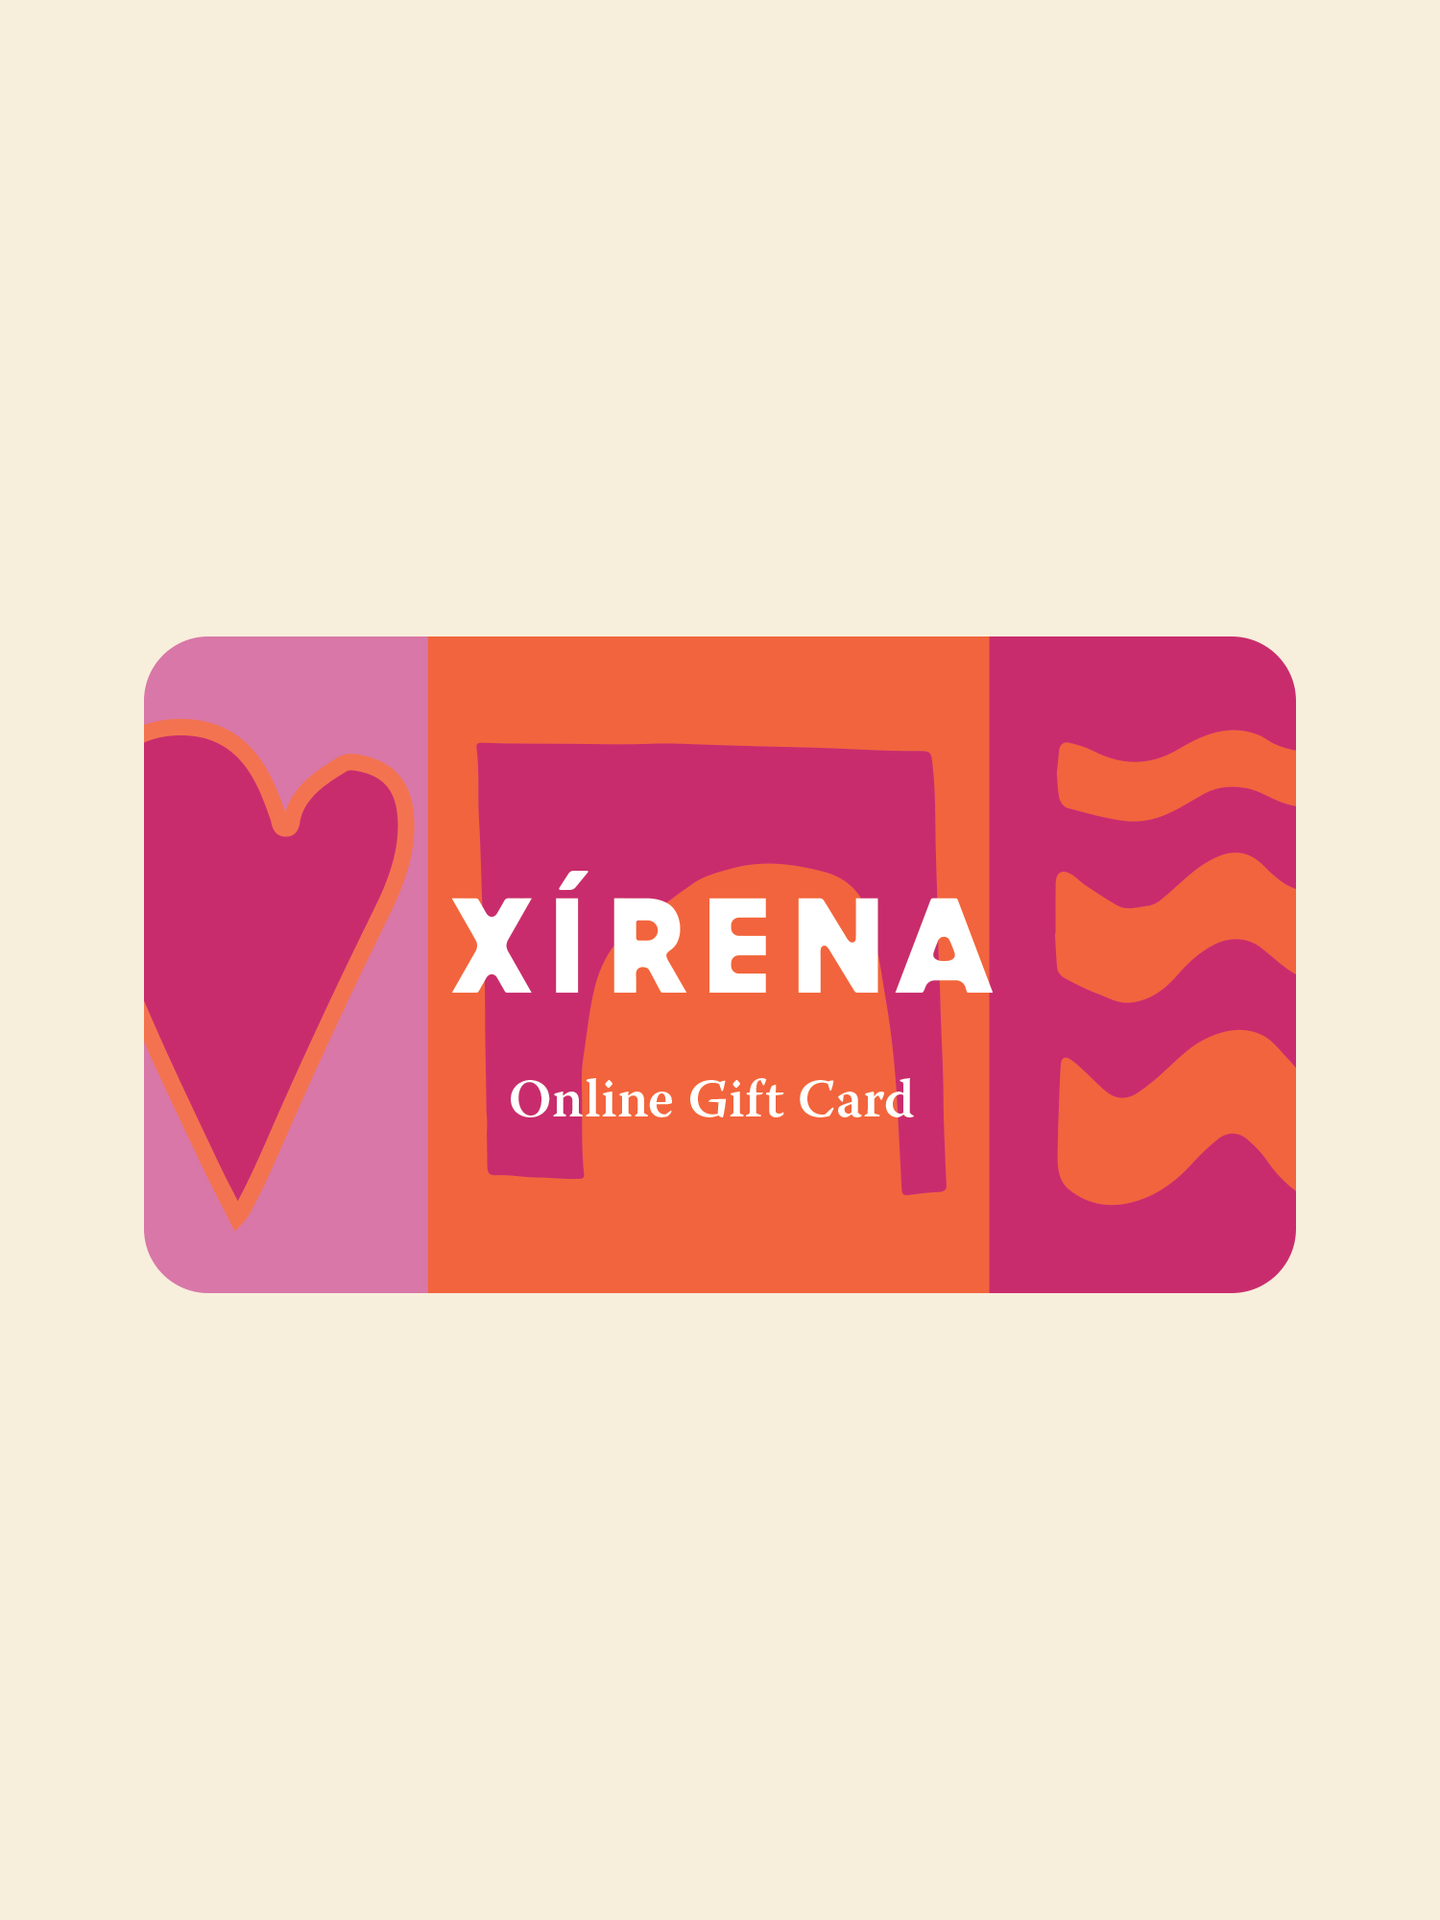 Xirena Gift Cards Online Gift Card